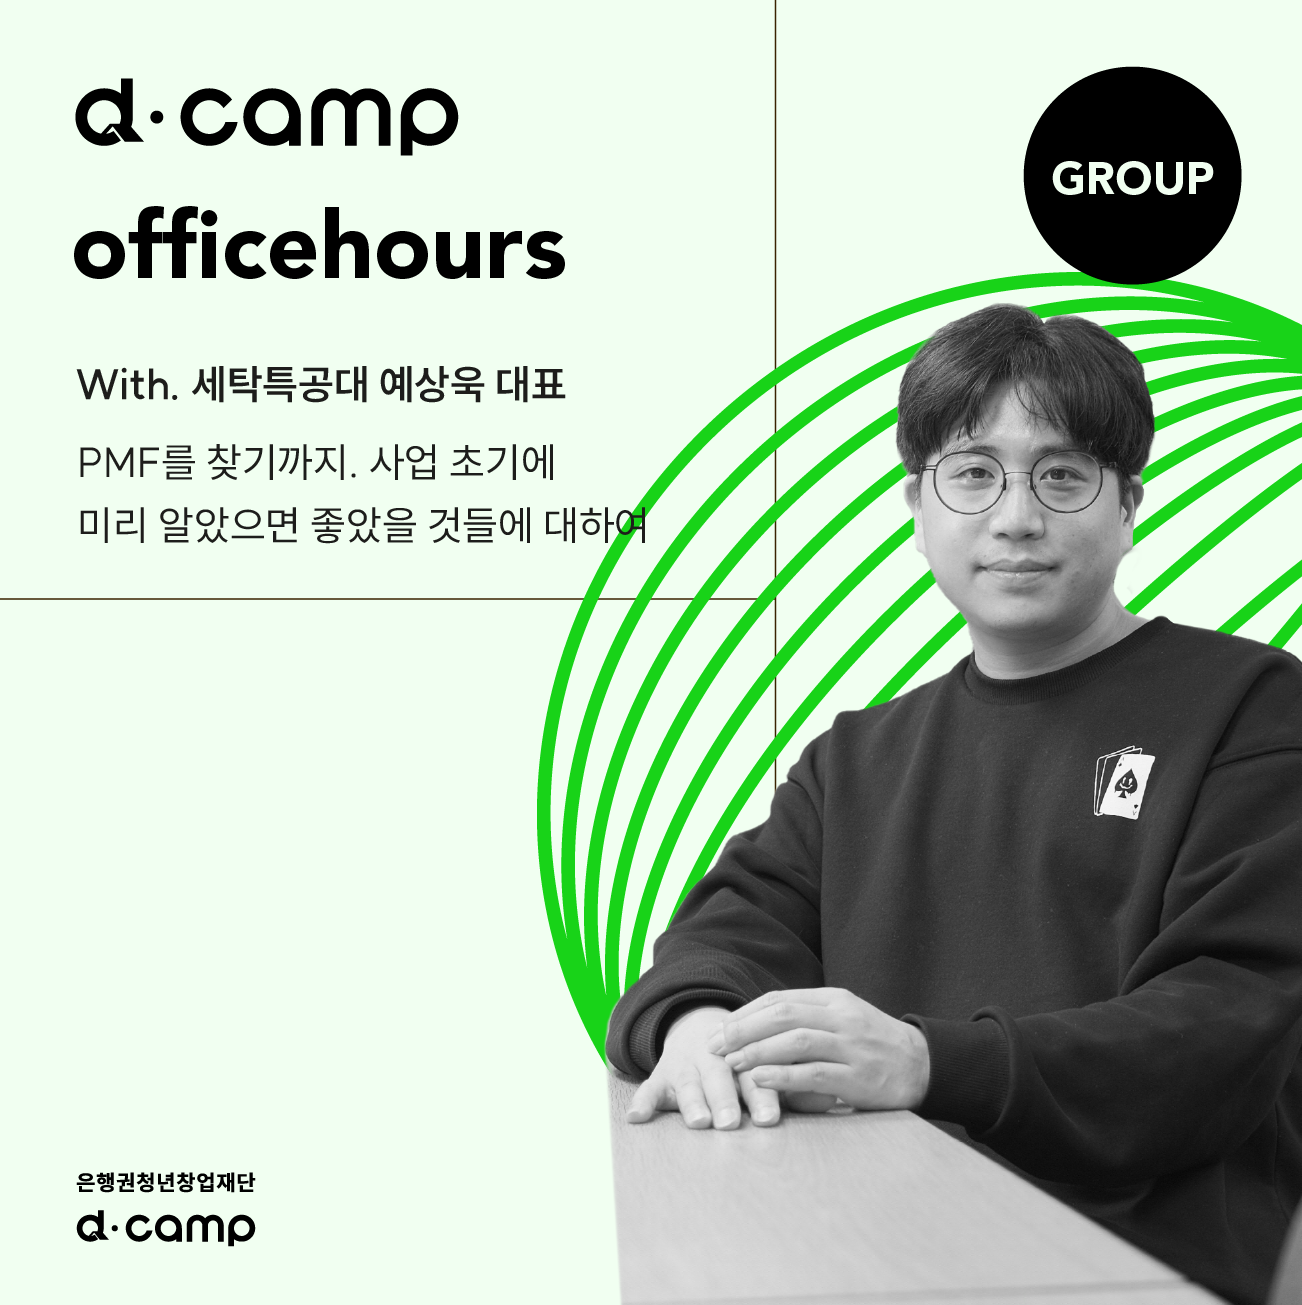 d·camp officehours (Group) : PMF를 찾기까지  의 웹포스터